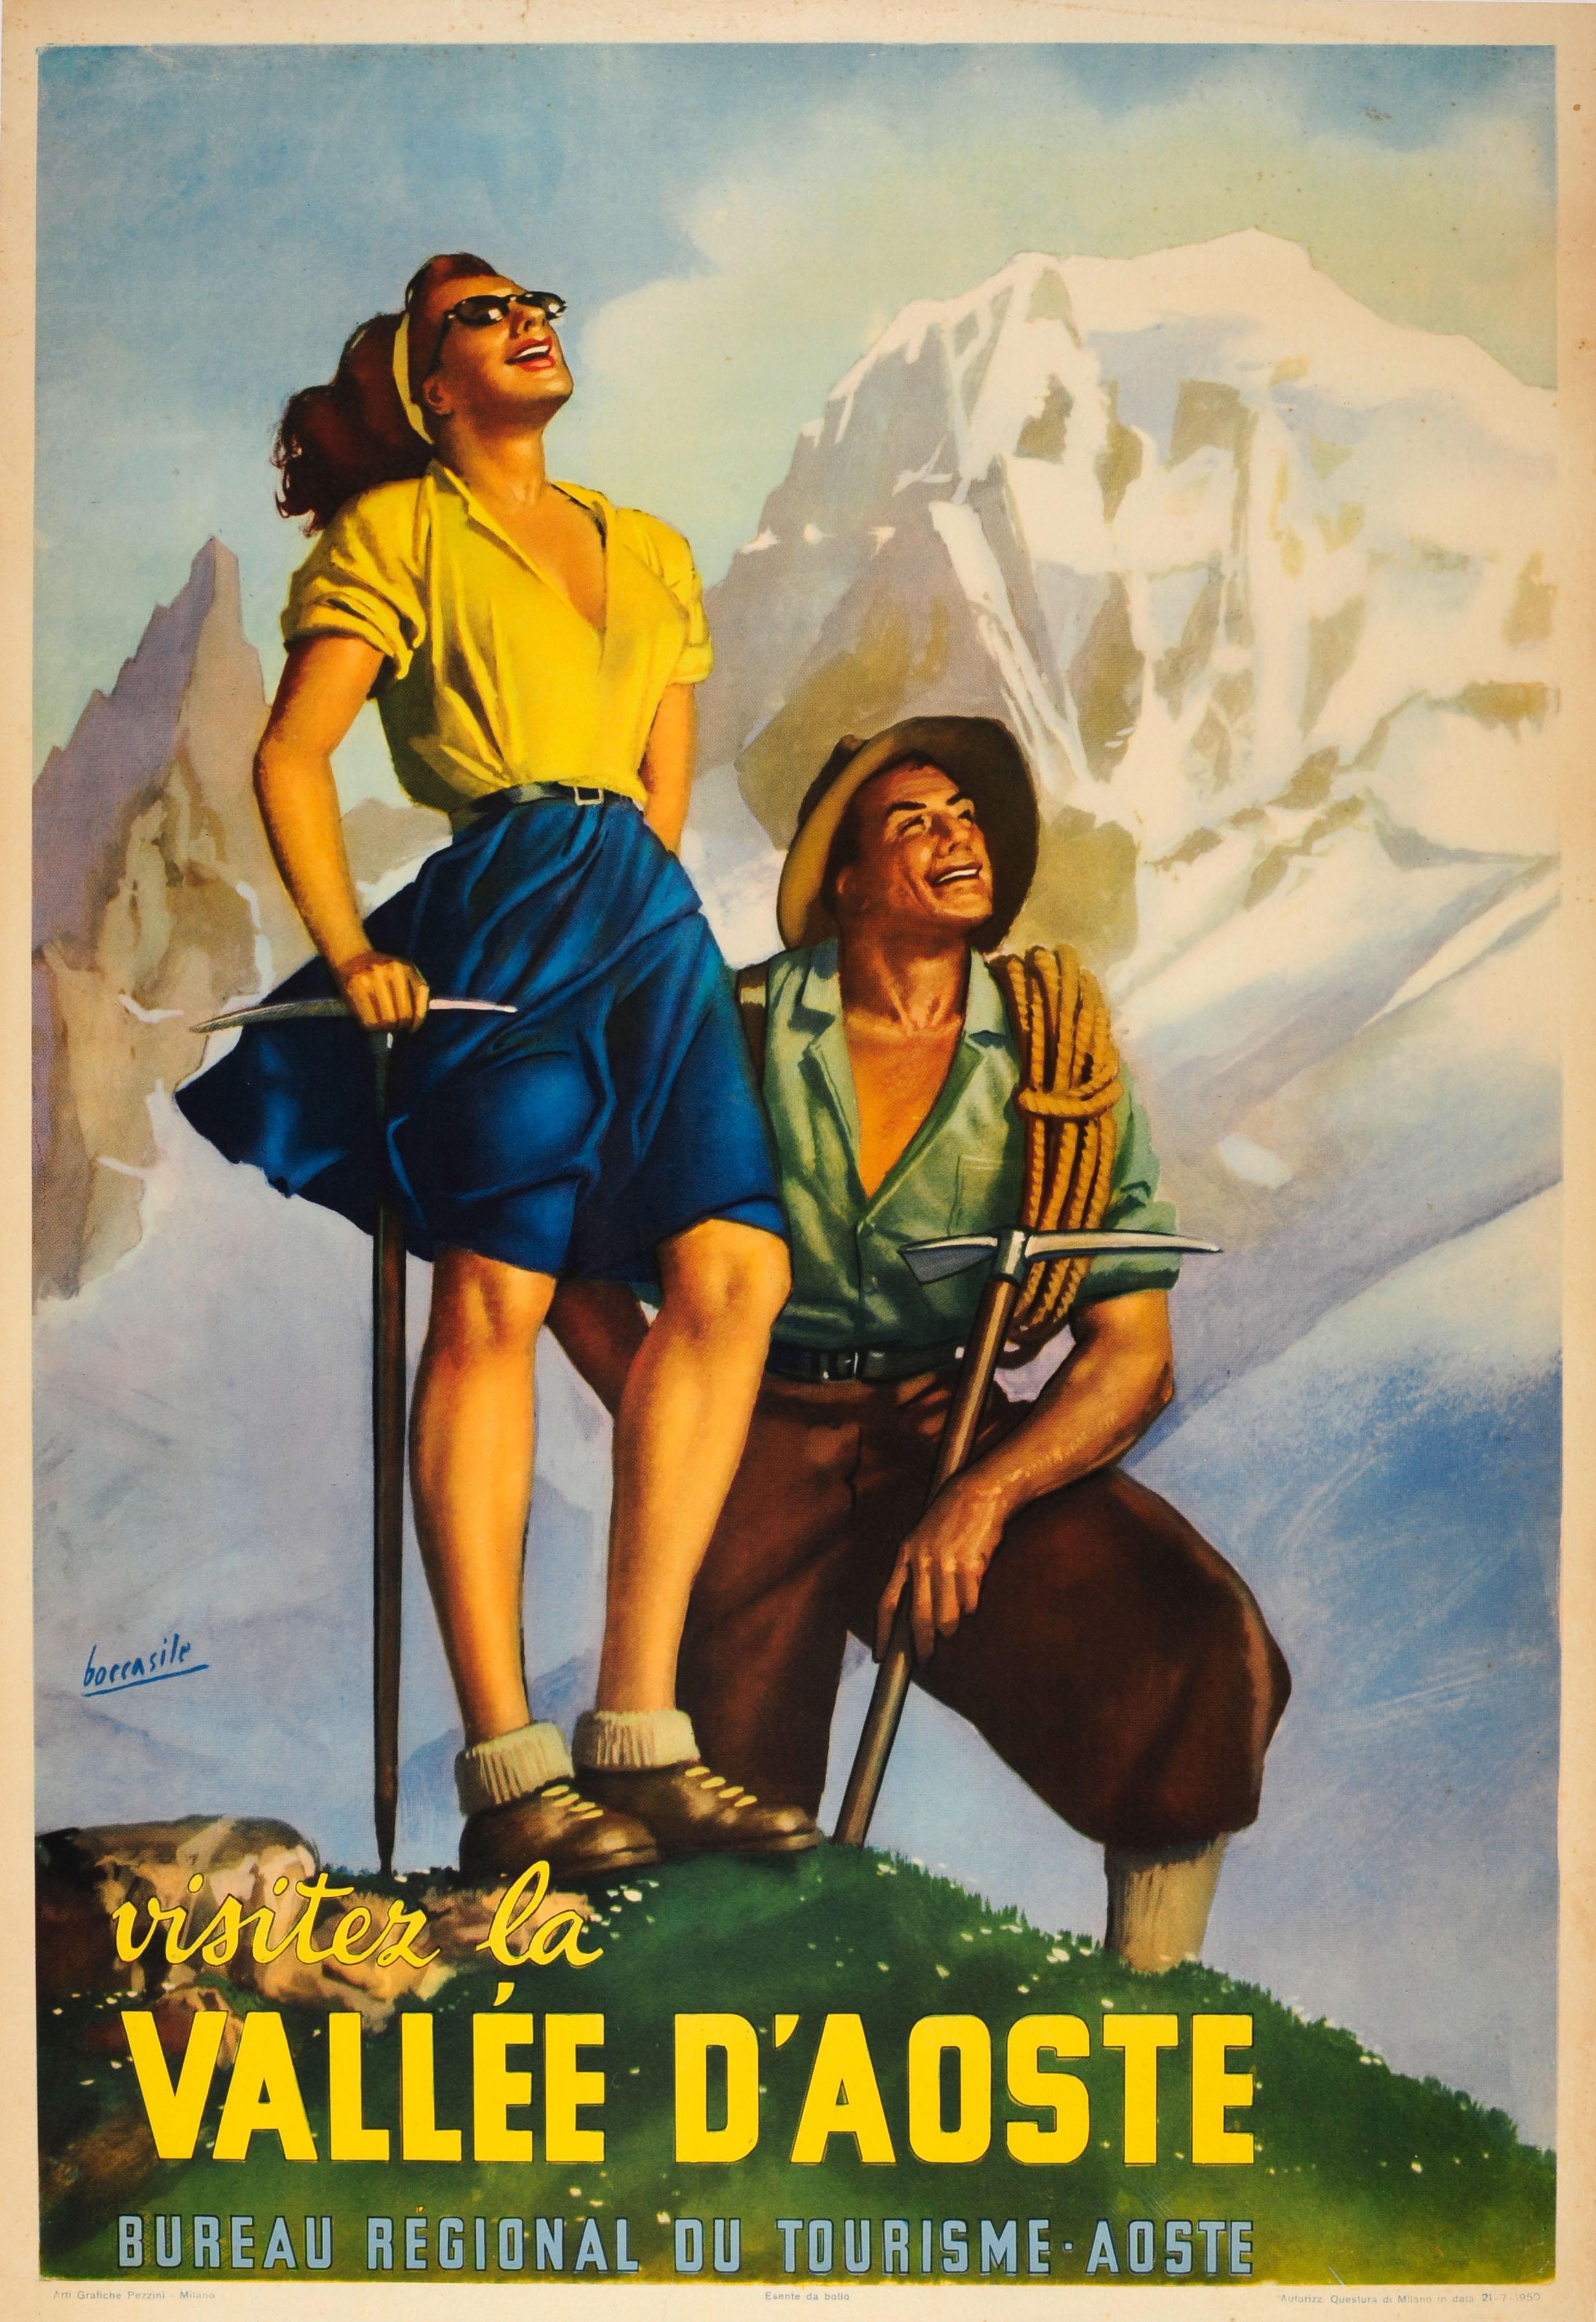 Gino Boccasile Print - Original Vintage Travel Poster Ft Hiking In The Aosta Valley Alps Vallee D'Aoste